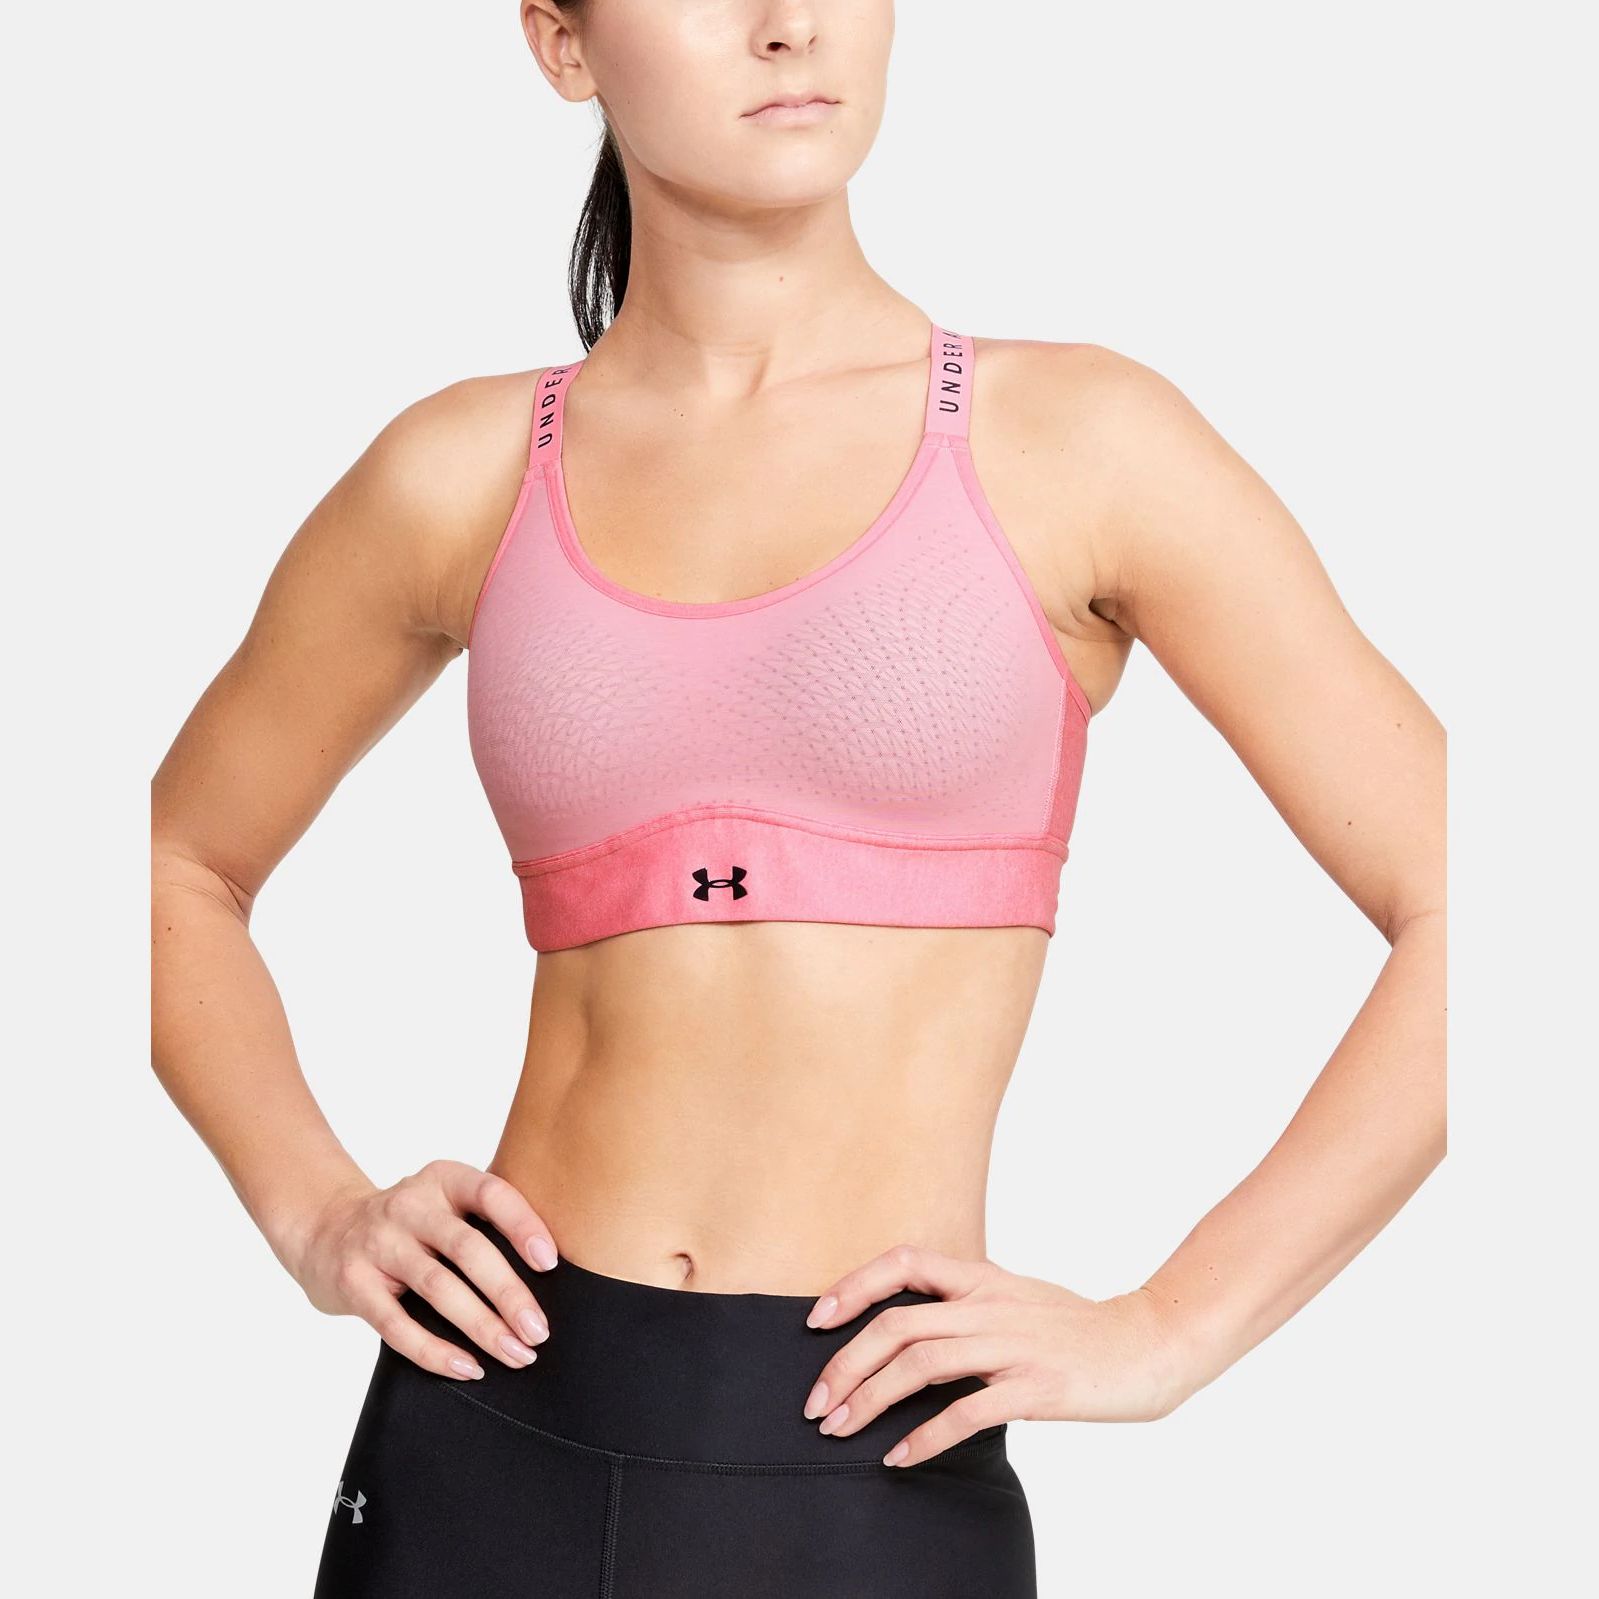 Under Armour Infinity Mid Covered - Sports Bra Sports Bras